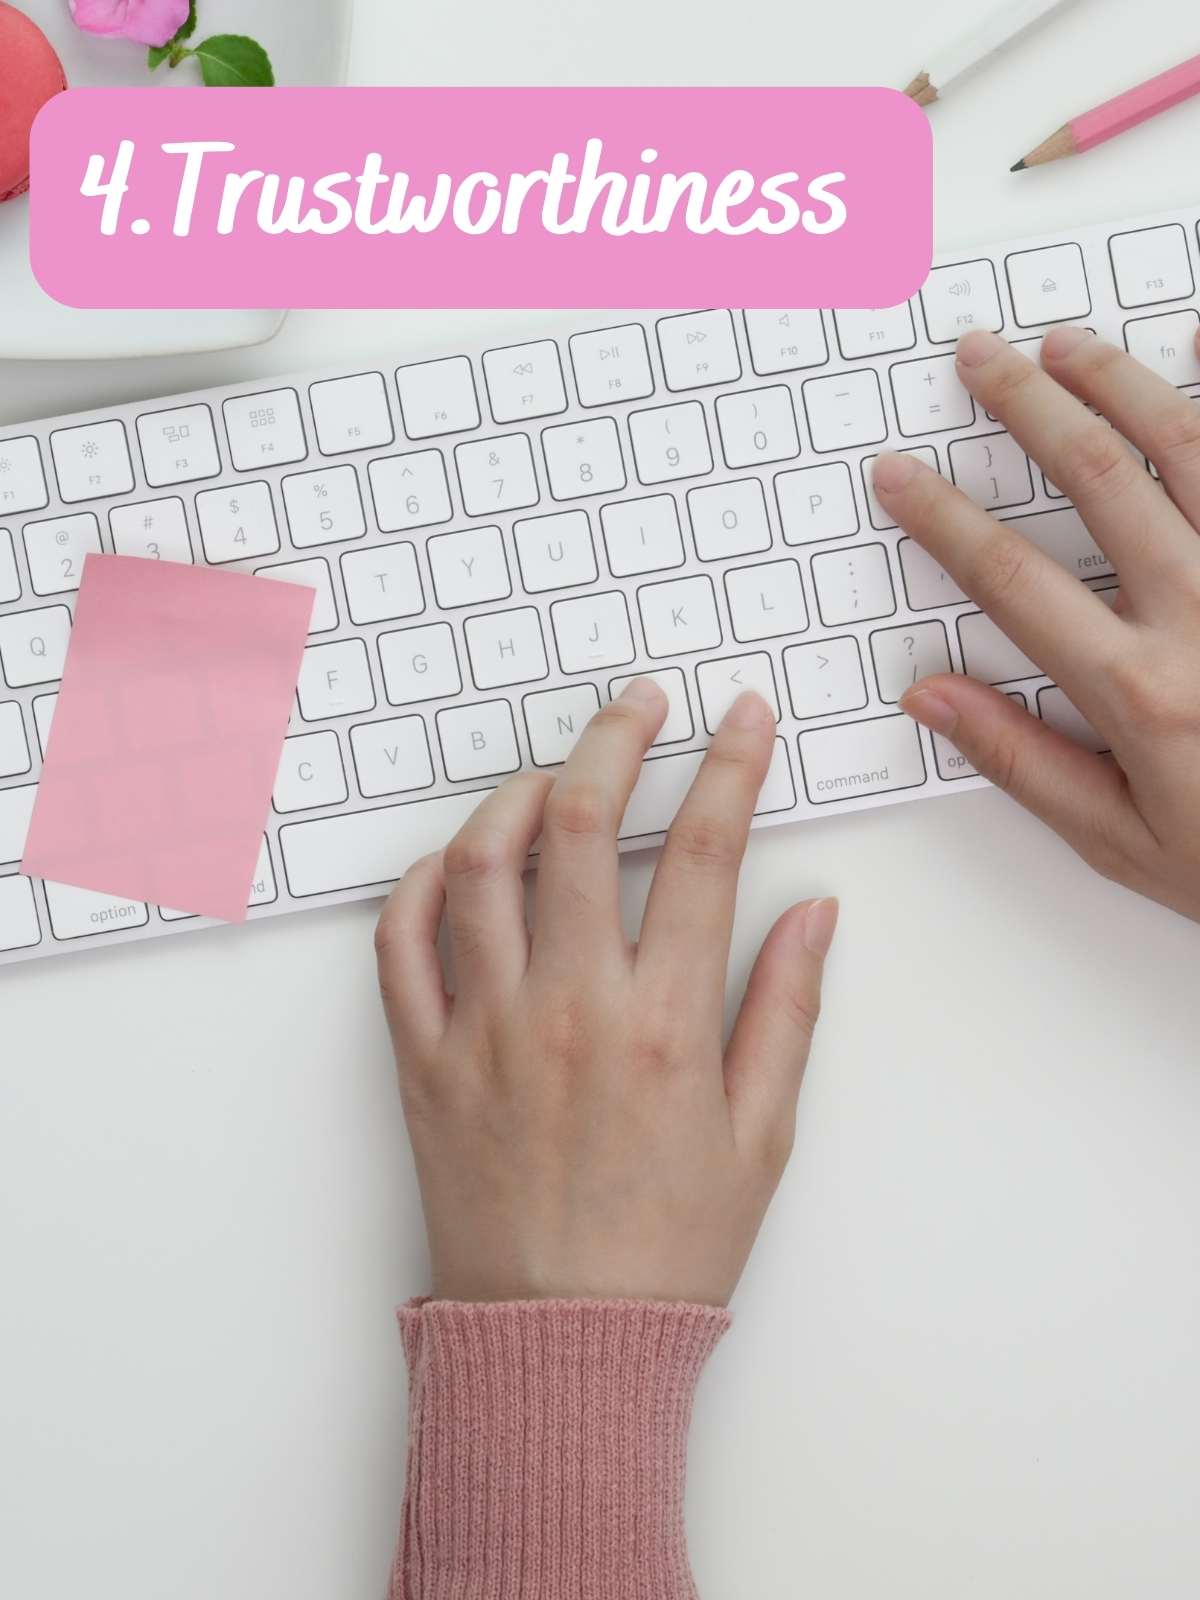 4. Trustworthiness. Hands typing on keyboard with pink sticky note.